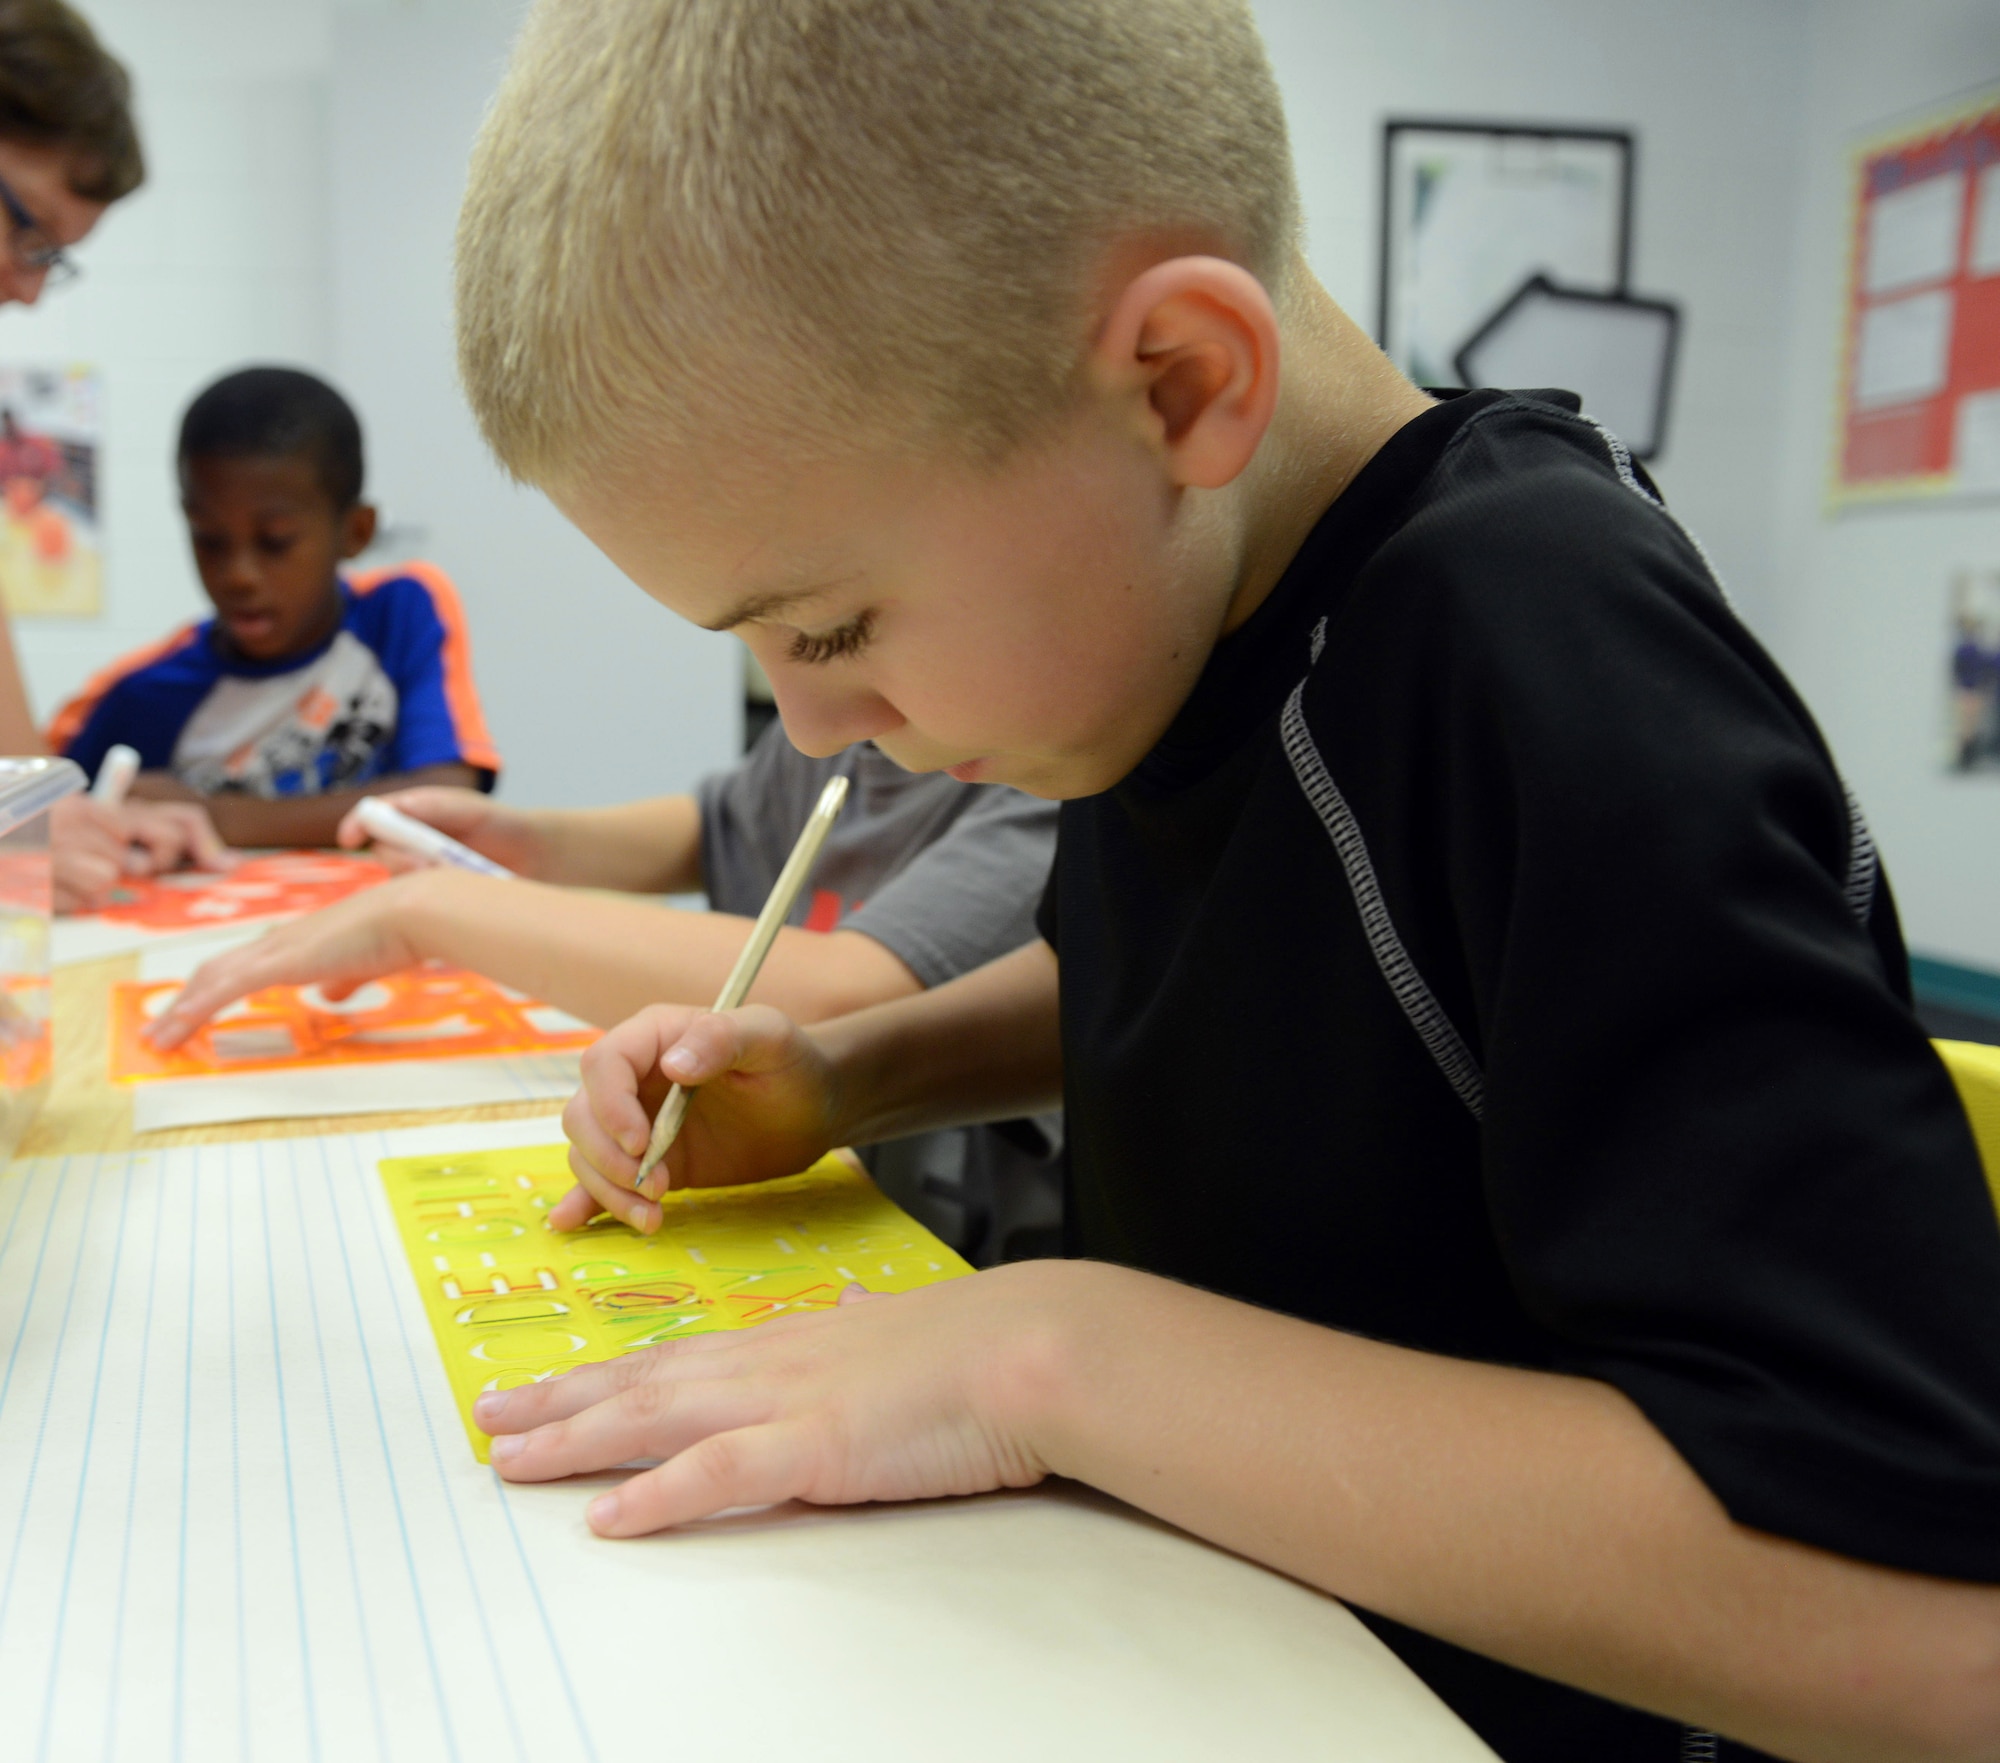 Eight-year-old Aaron Franklin creates artwork with a group of students at the center. . (U.S. Air Force photo by Tommie Horton)